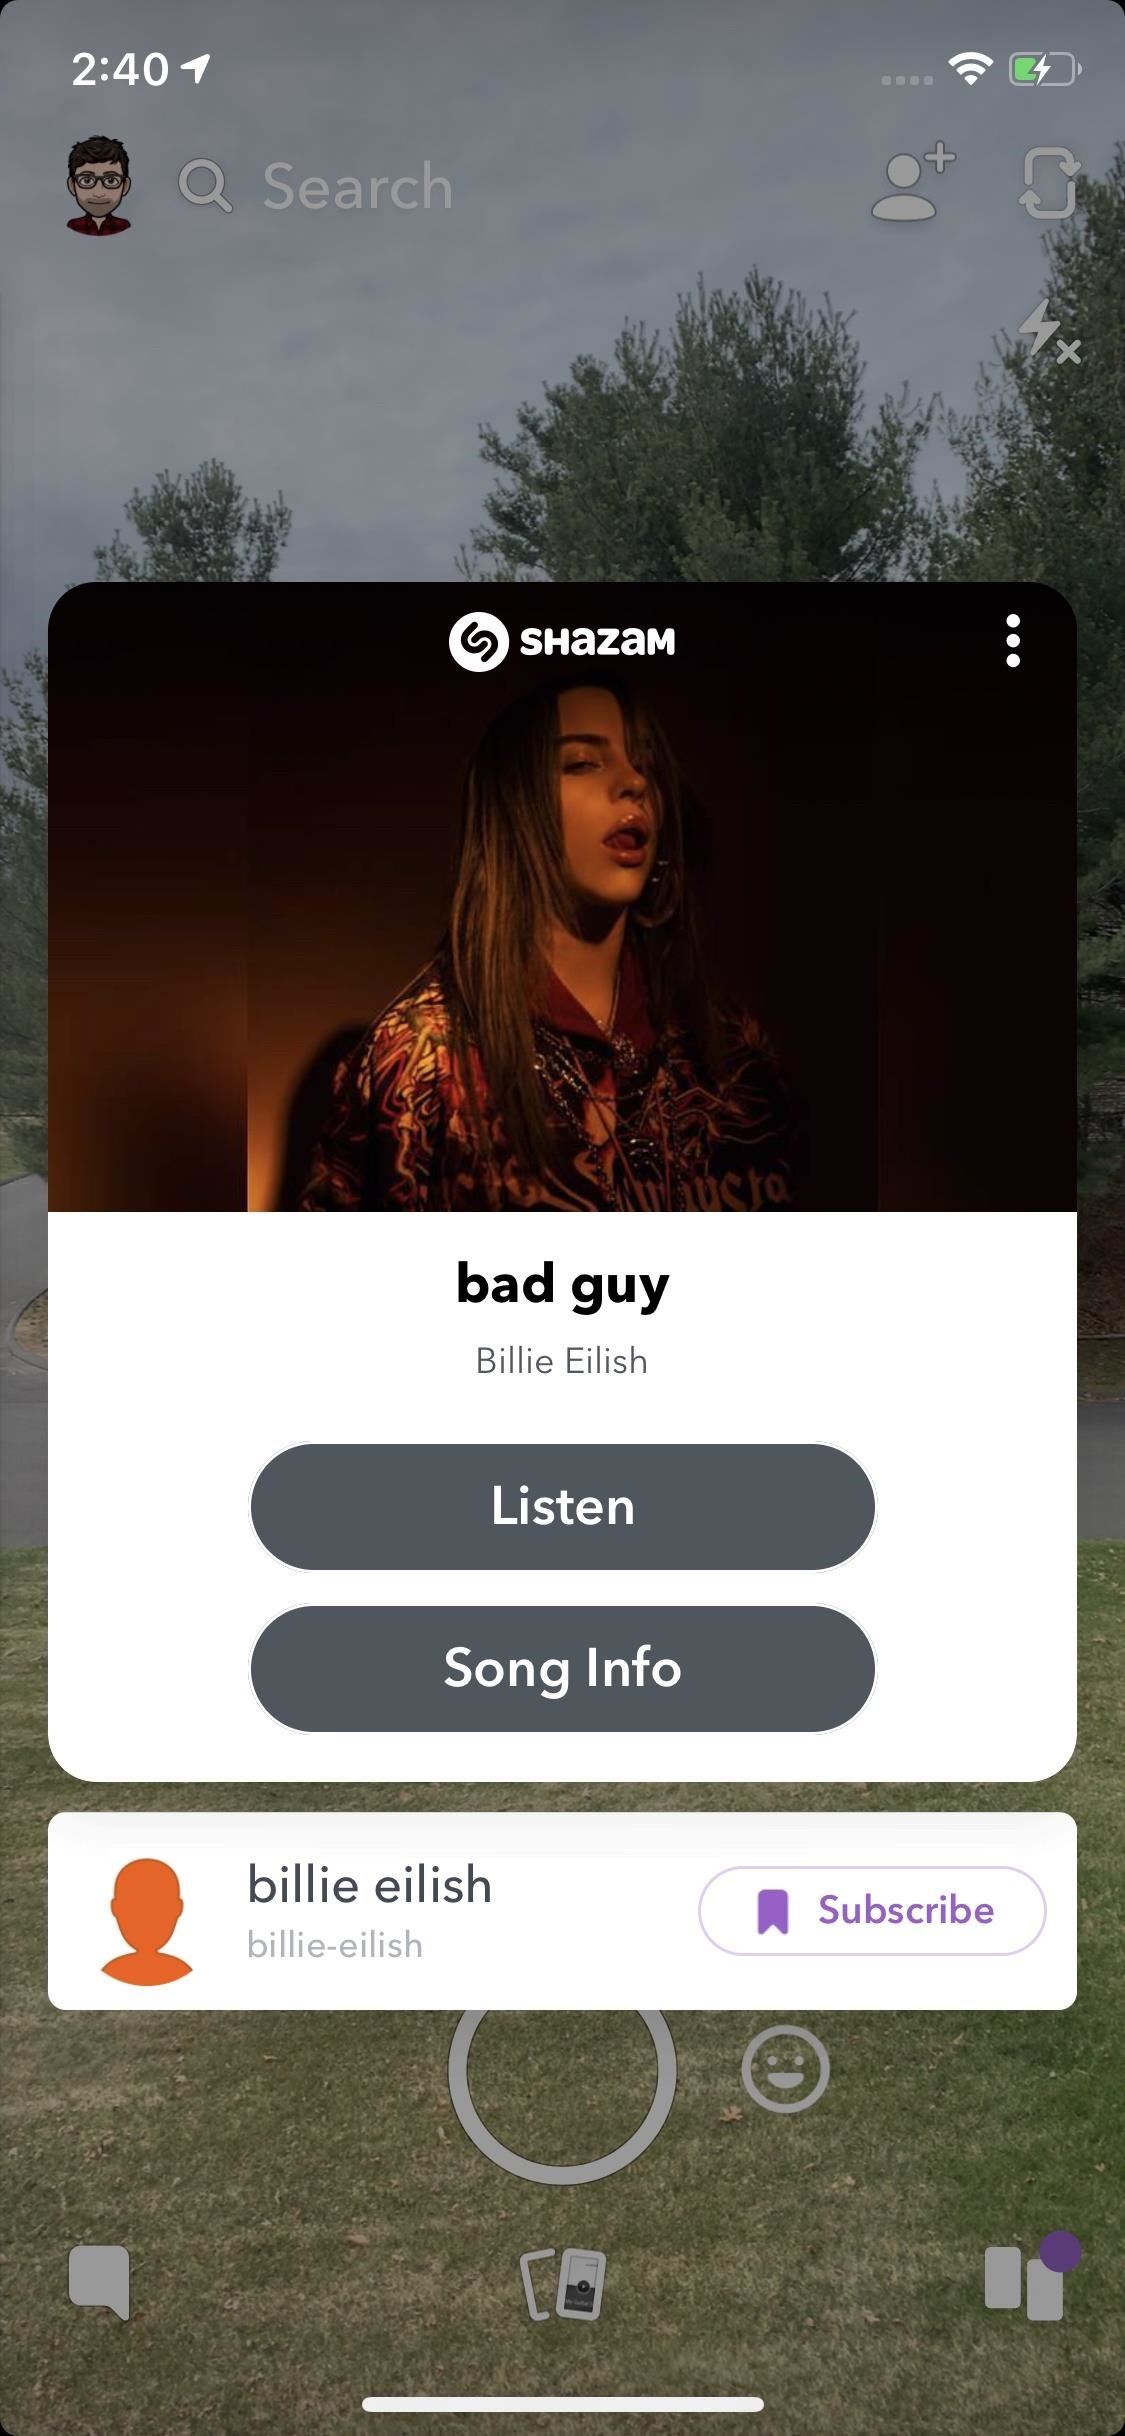 How to Use Snapchat to Figure Out What Song Is Playing Around You